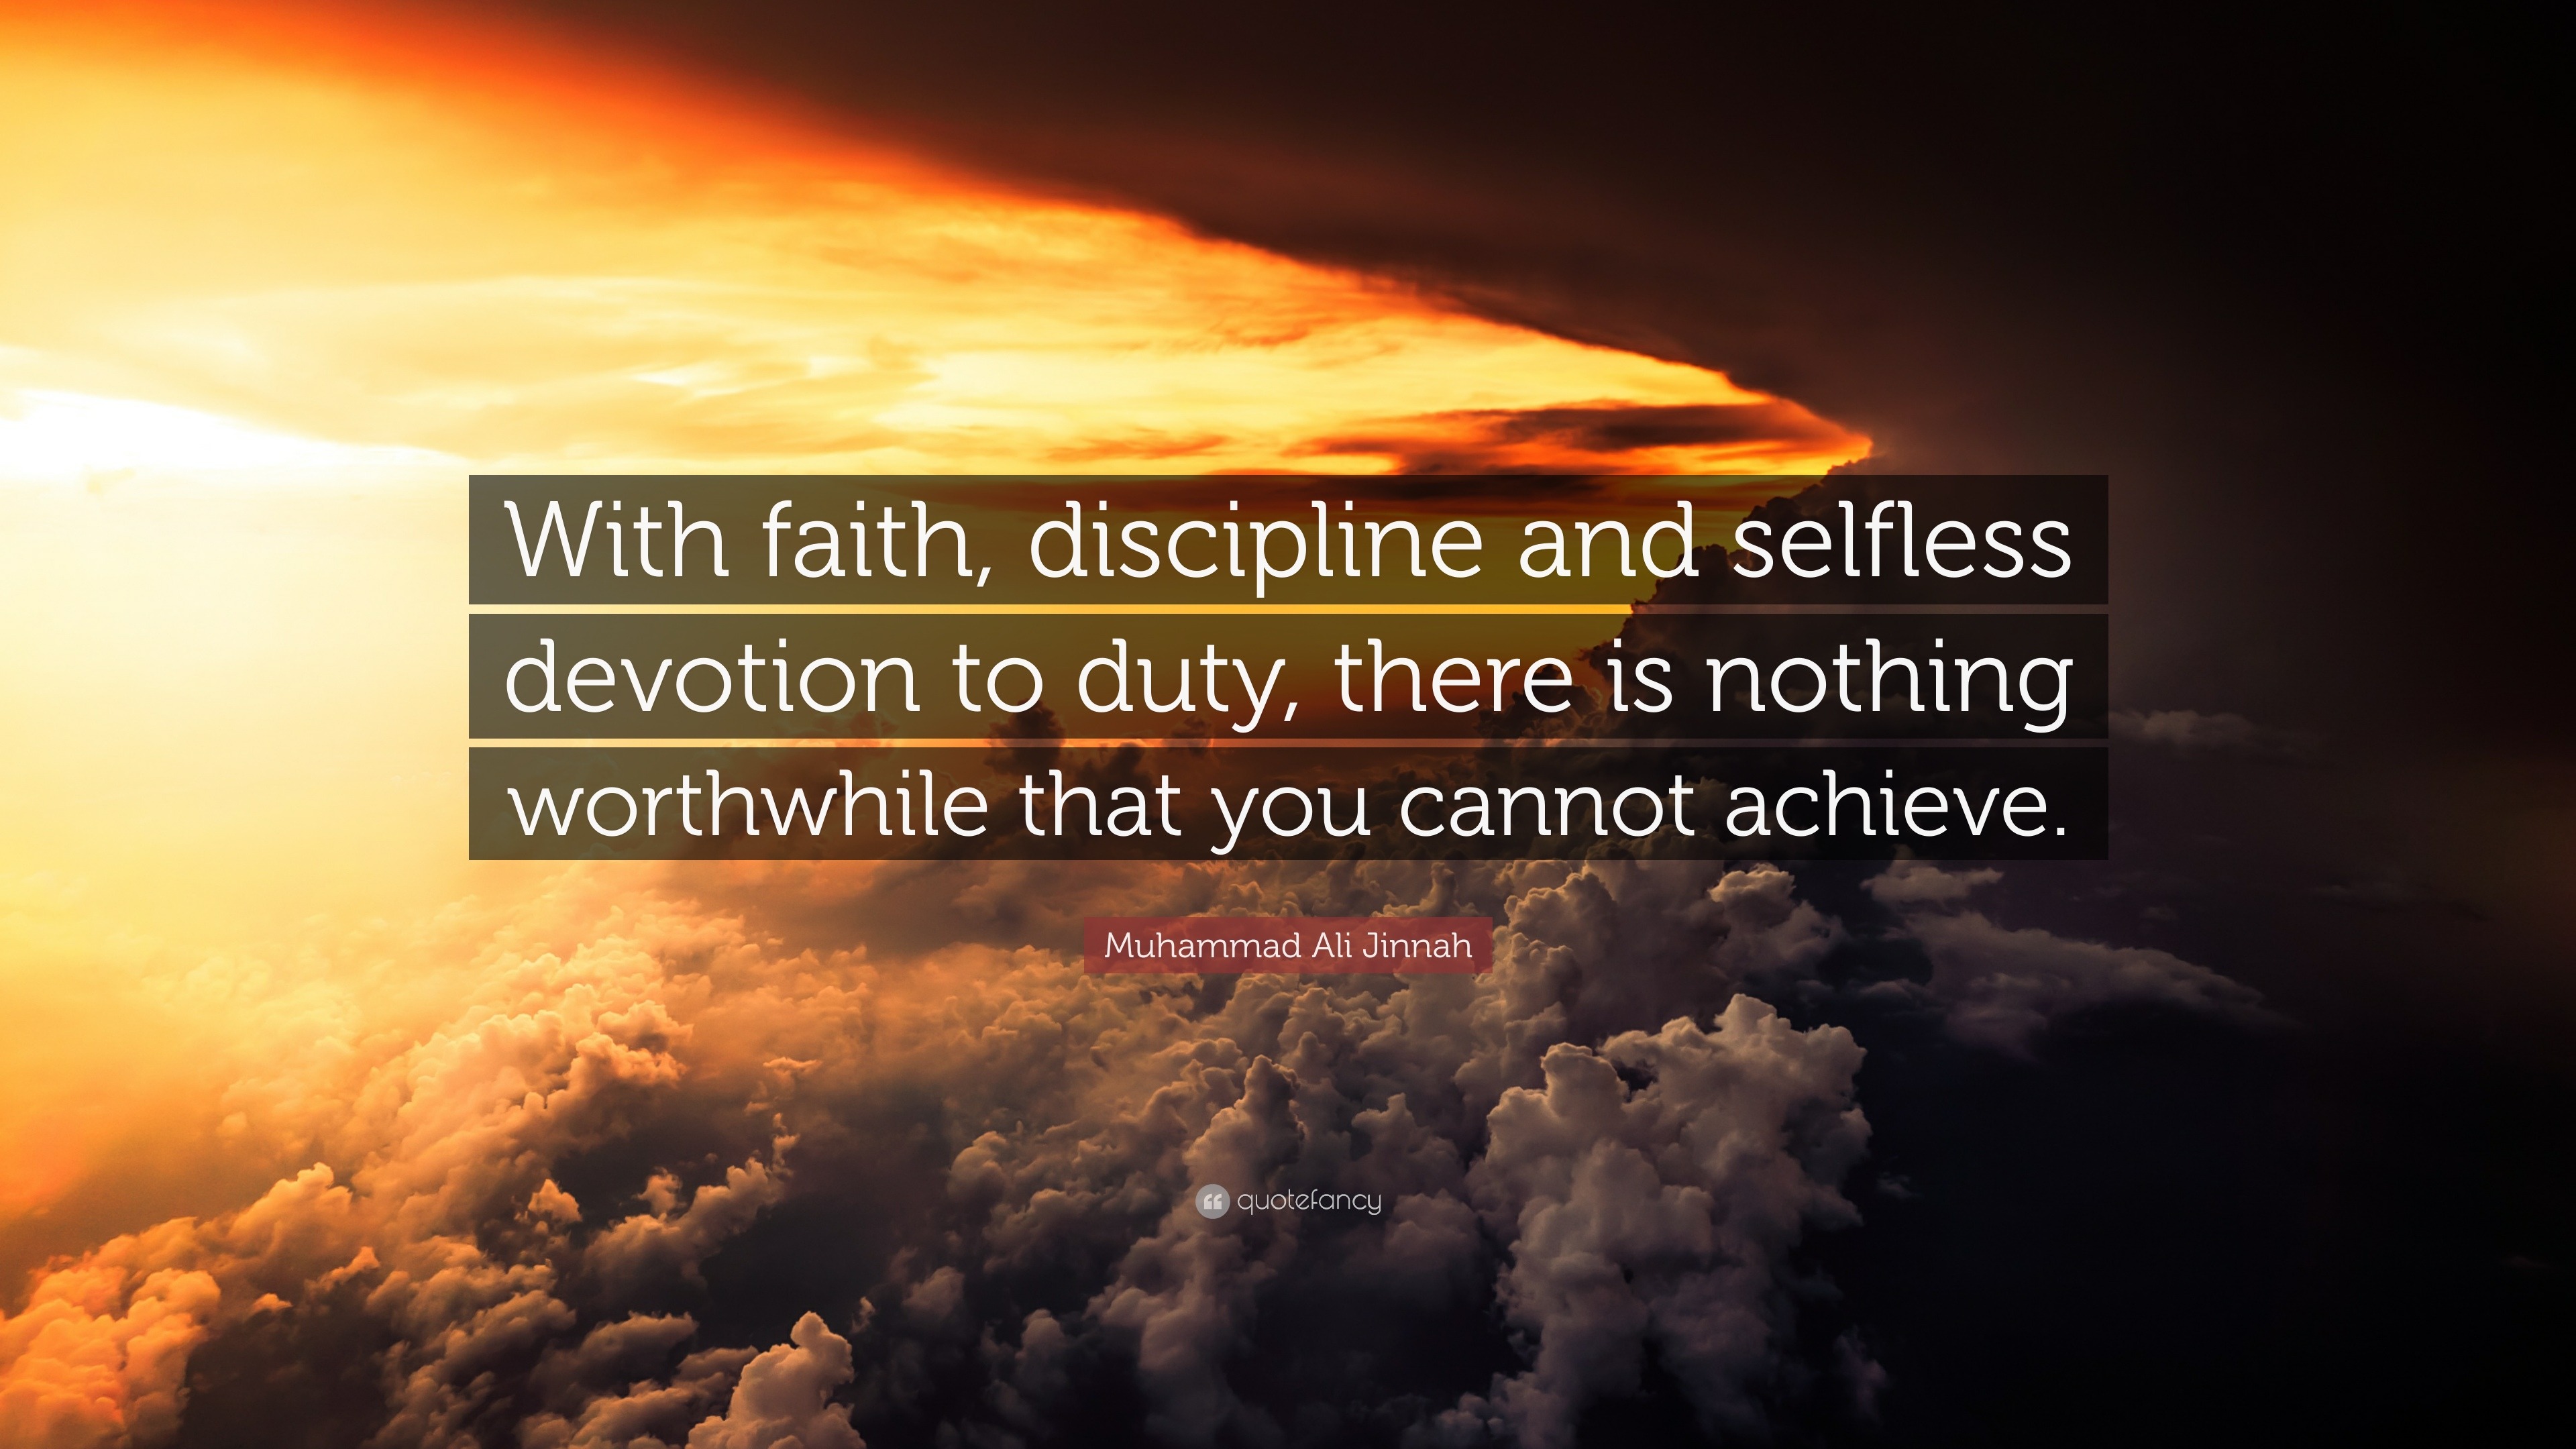 Muhammad Ali Jinnah Quote: "With faith, discipline and ...